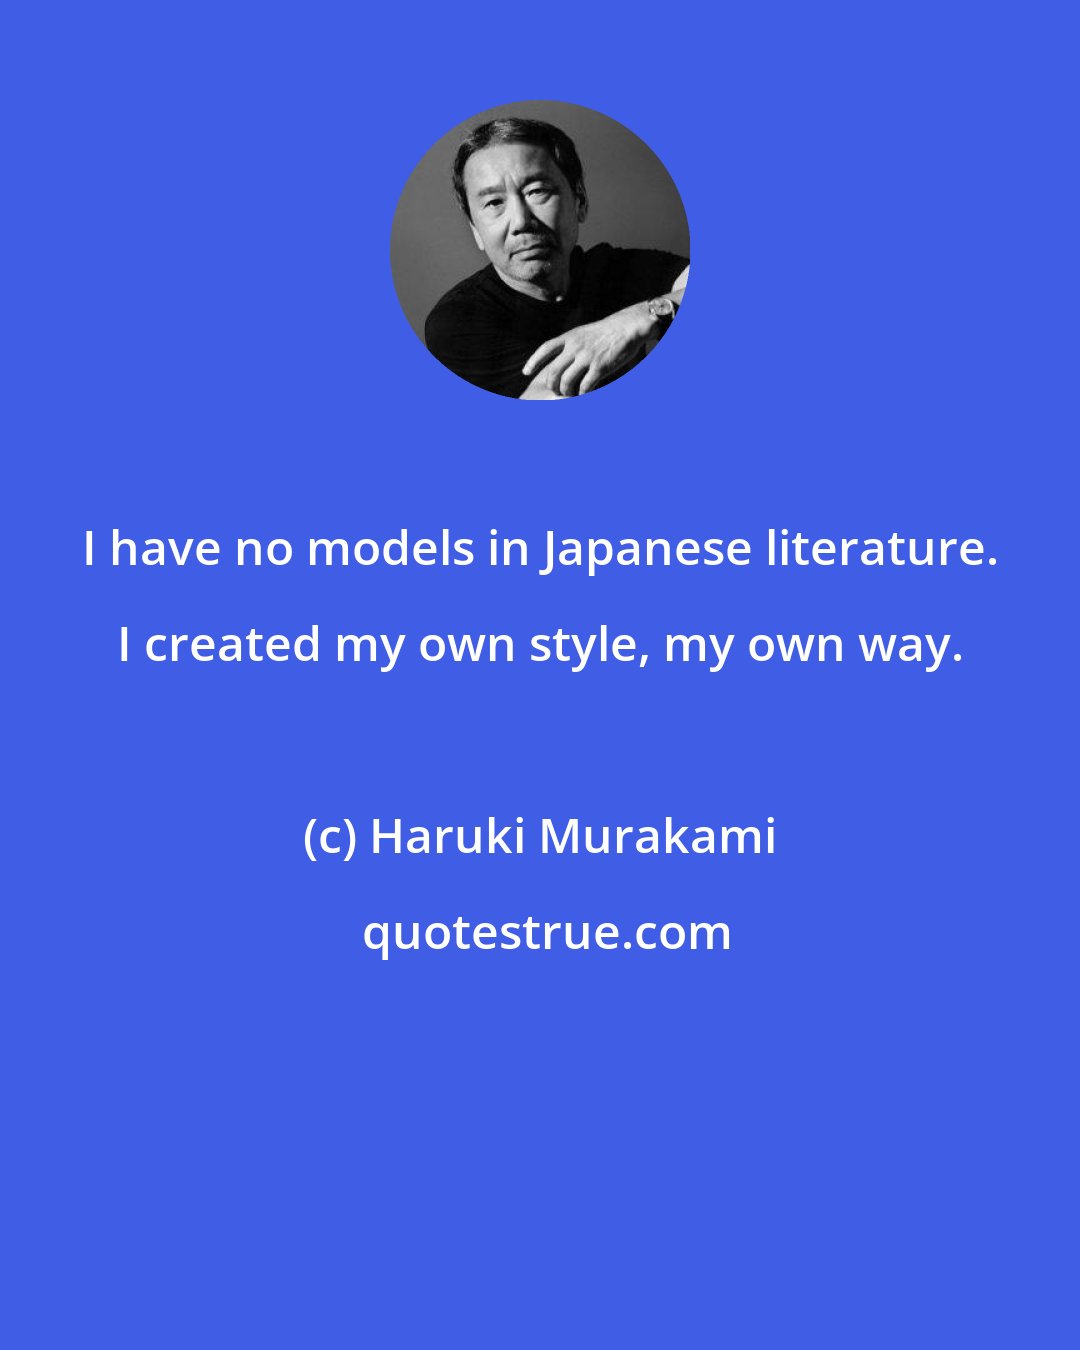 Haruki Murakami: I have no models in Japanese literature. I created my own style, my own way.